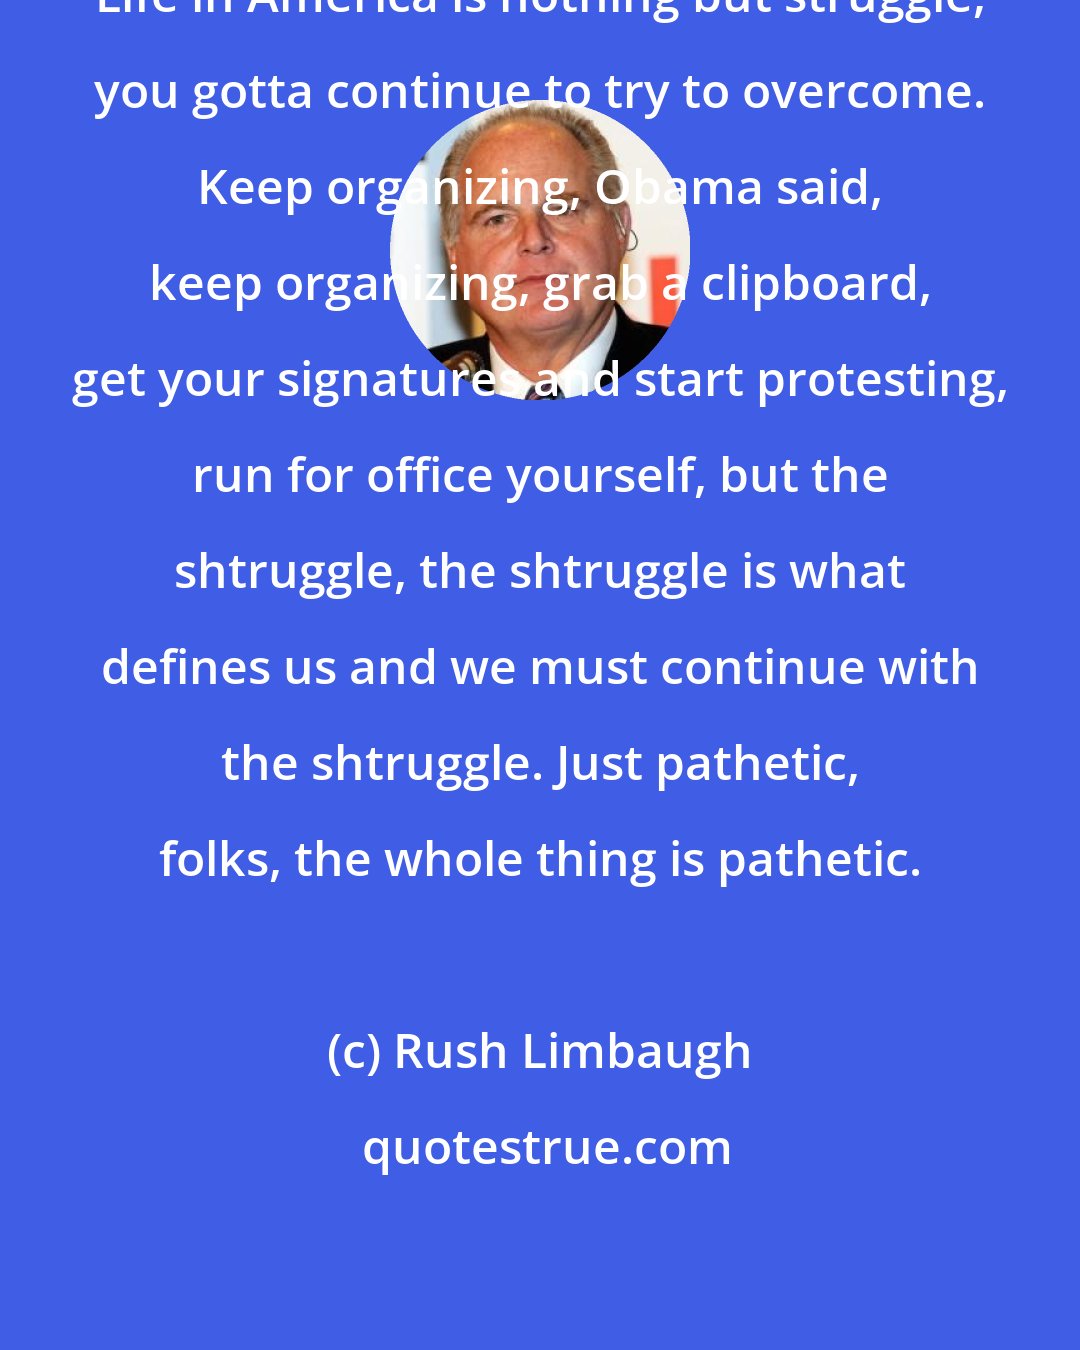 Rush Limbaugh: Life in America is nothing but struggle, you gotta continue to try to overcome. Keep organizing, Obama said, keep organizing, grab a clipboard, get your signatures and start protesting, run for office yourself, but the shtruggle, the shtruggle is what defines us and we must continue with the shtruggle. Just pathetic, folks, the whole thing is pathetic.